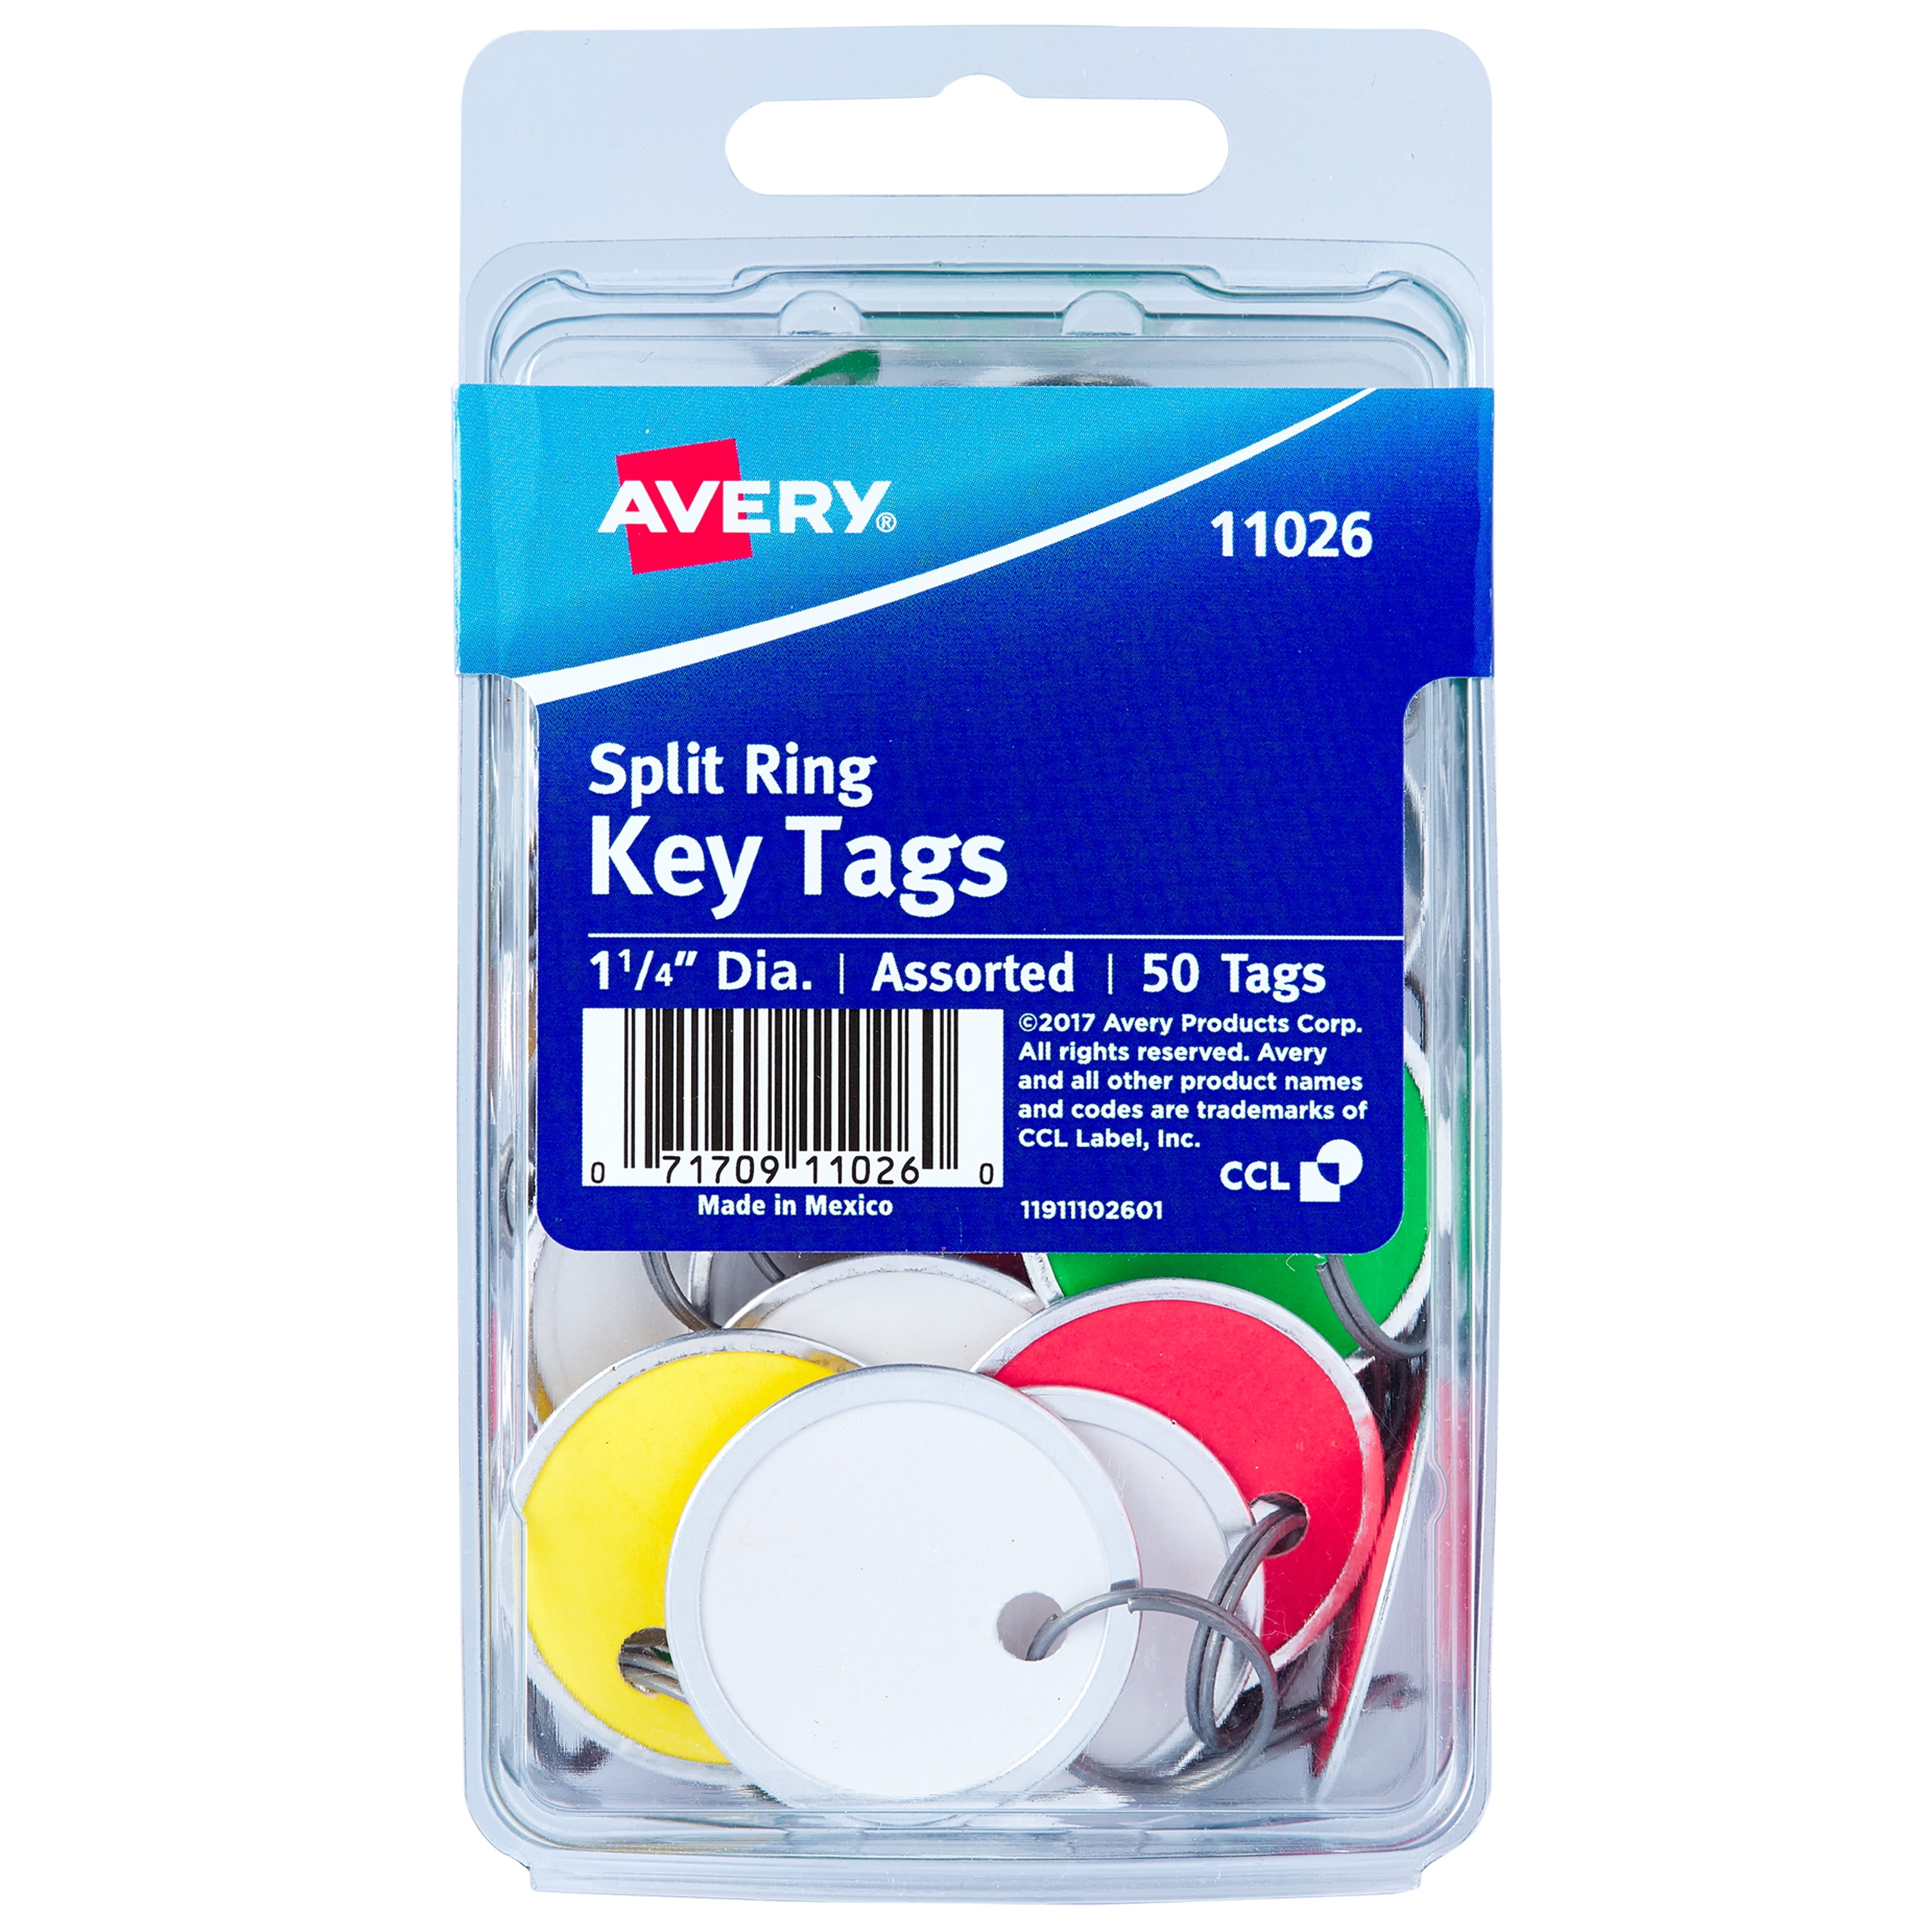 Paper Key Tags Colored Lot of 10 1193. w/Split ring